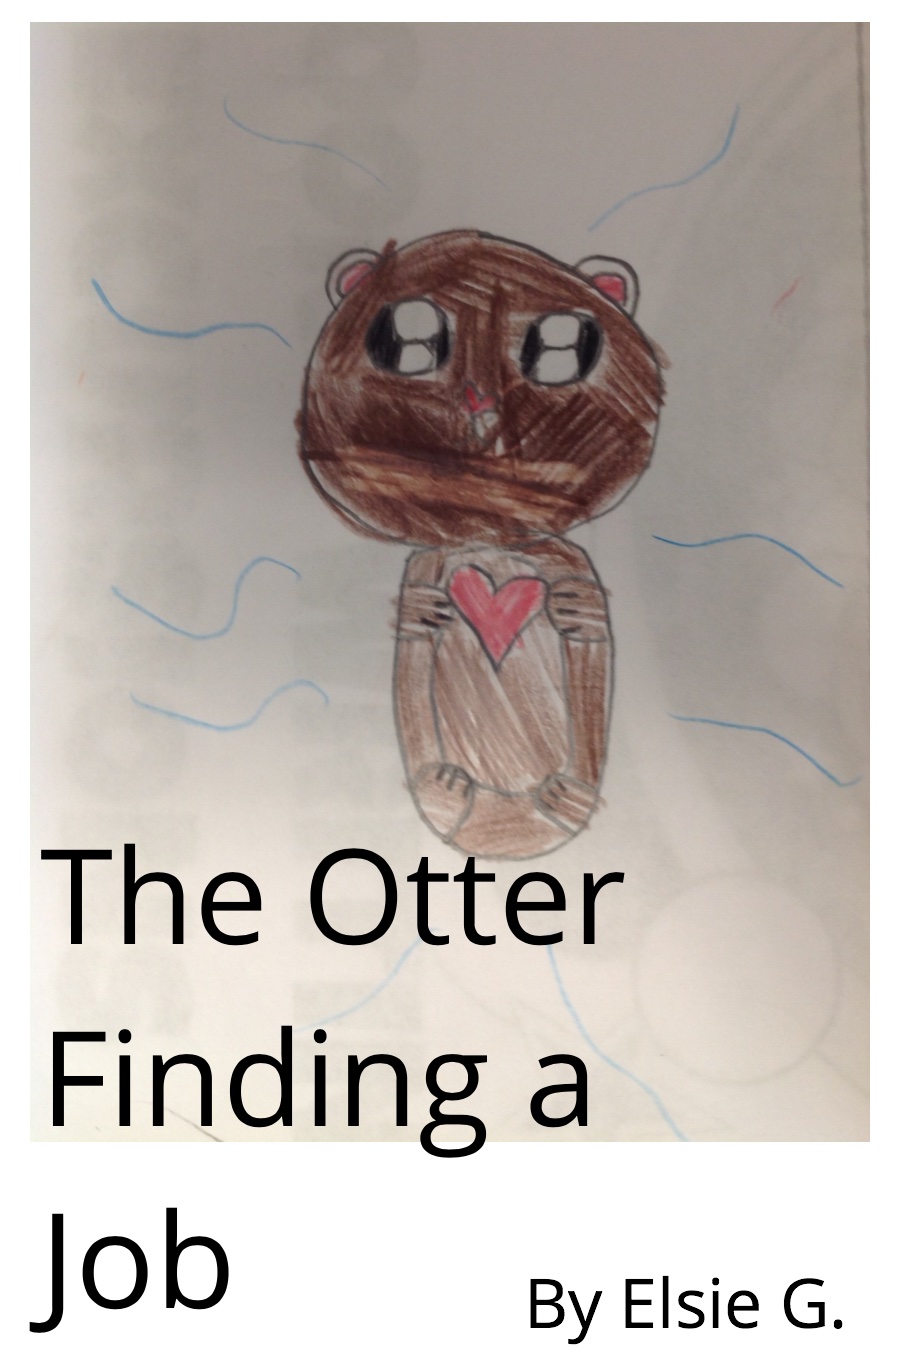 The Otter Finding a Job by Elsie G